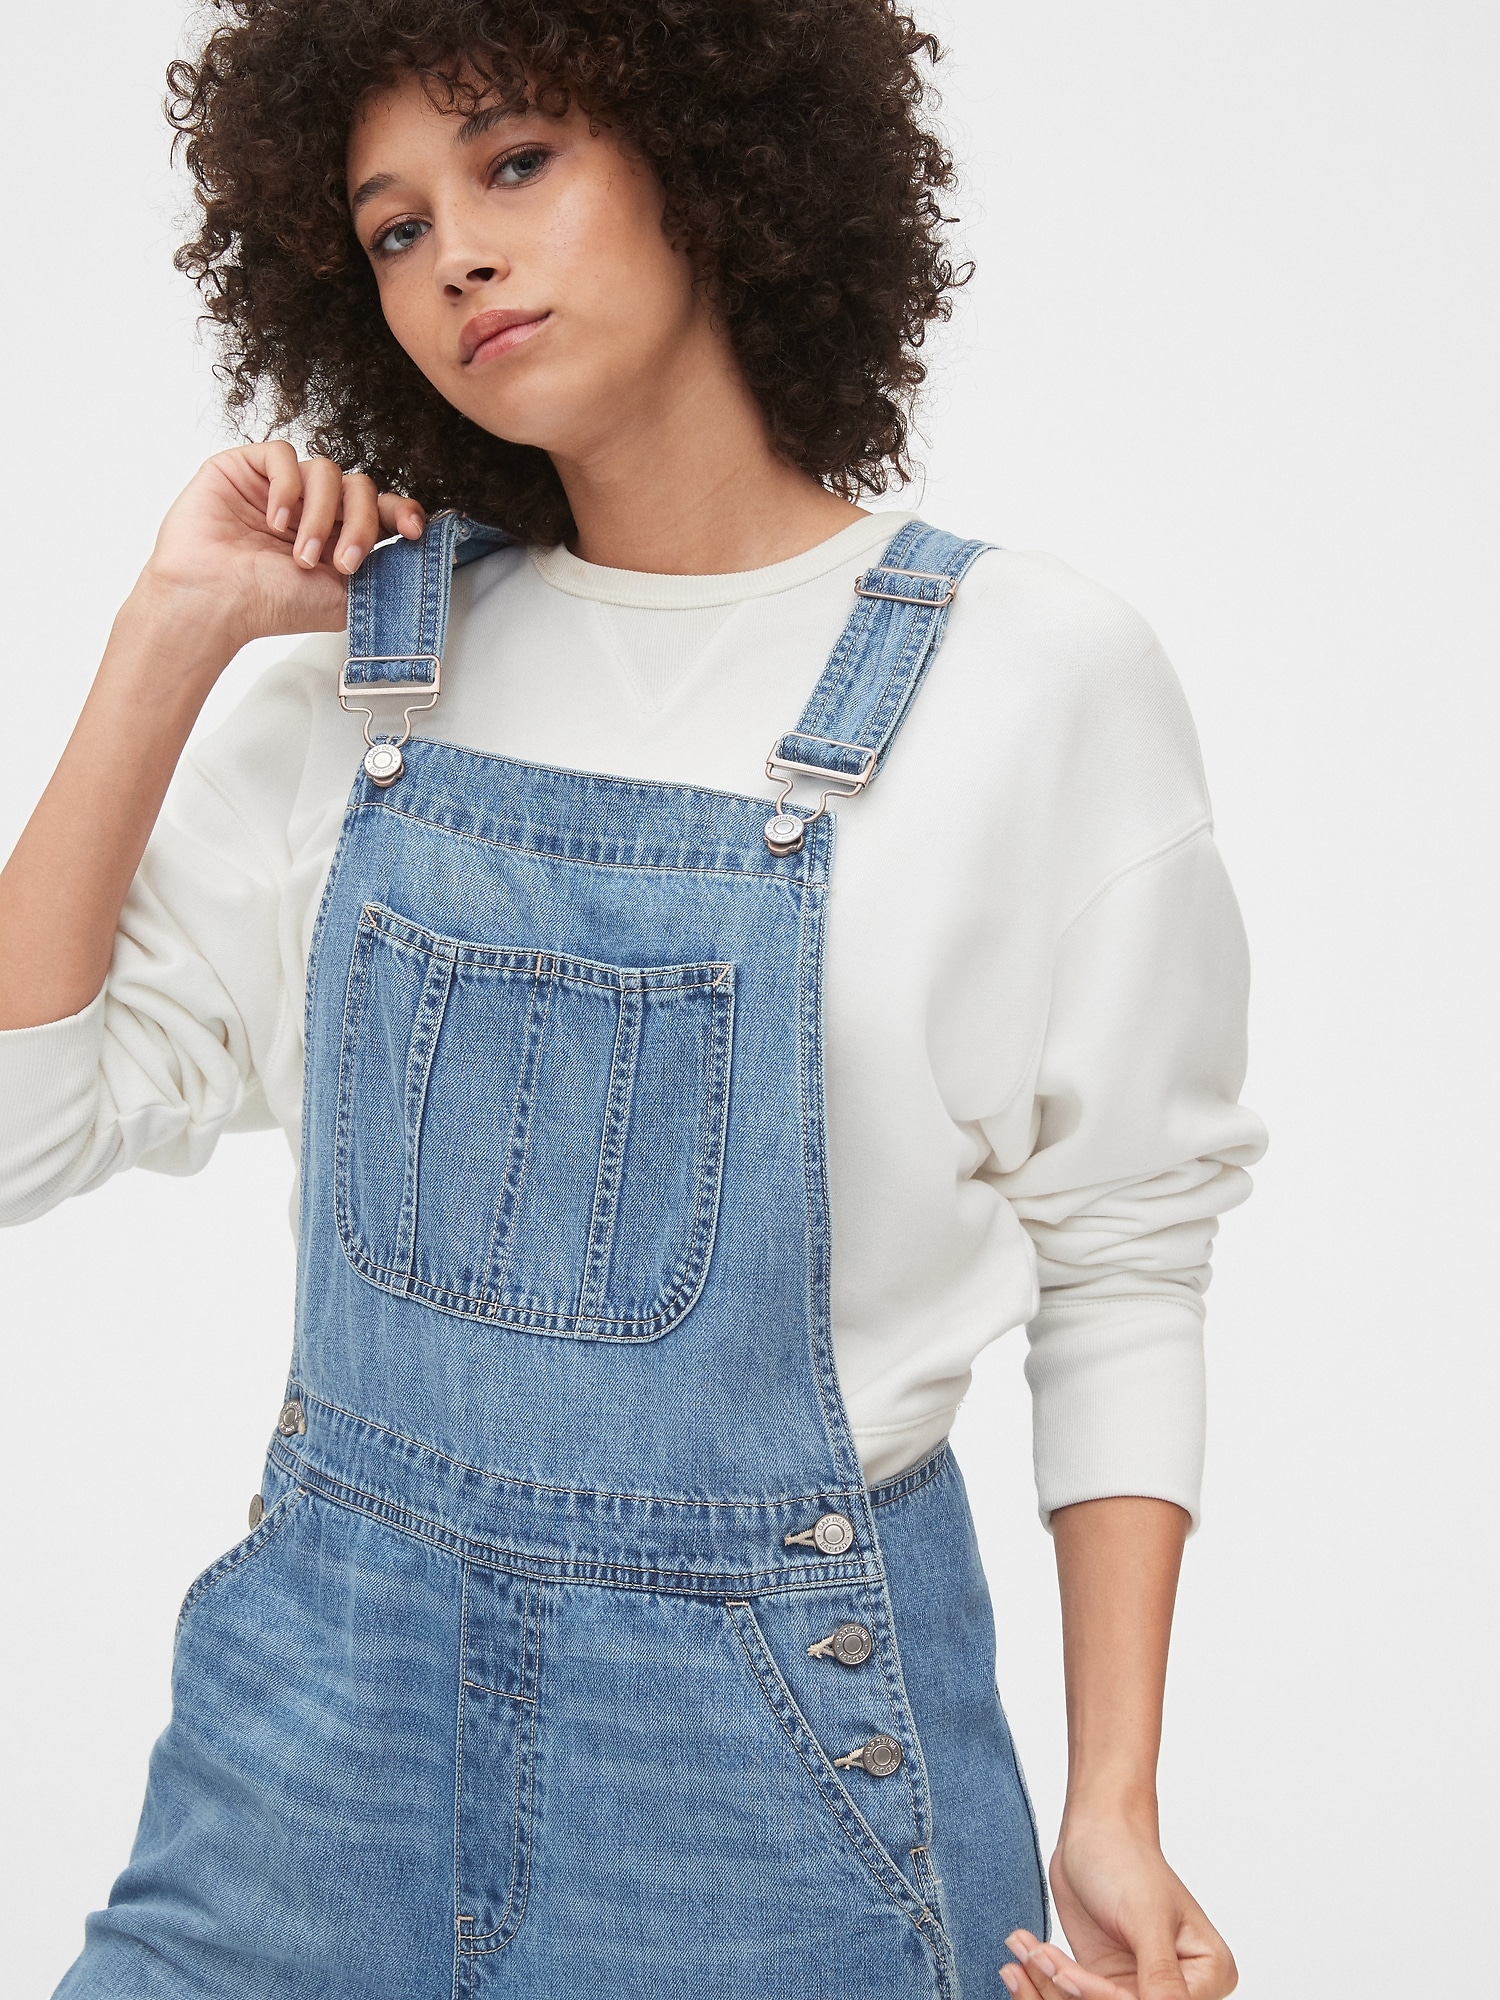 Overalls Clothes For Women Style Crush Girls Overalls | My XXX Hot Girl